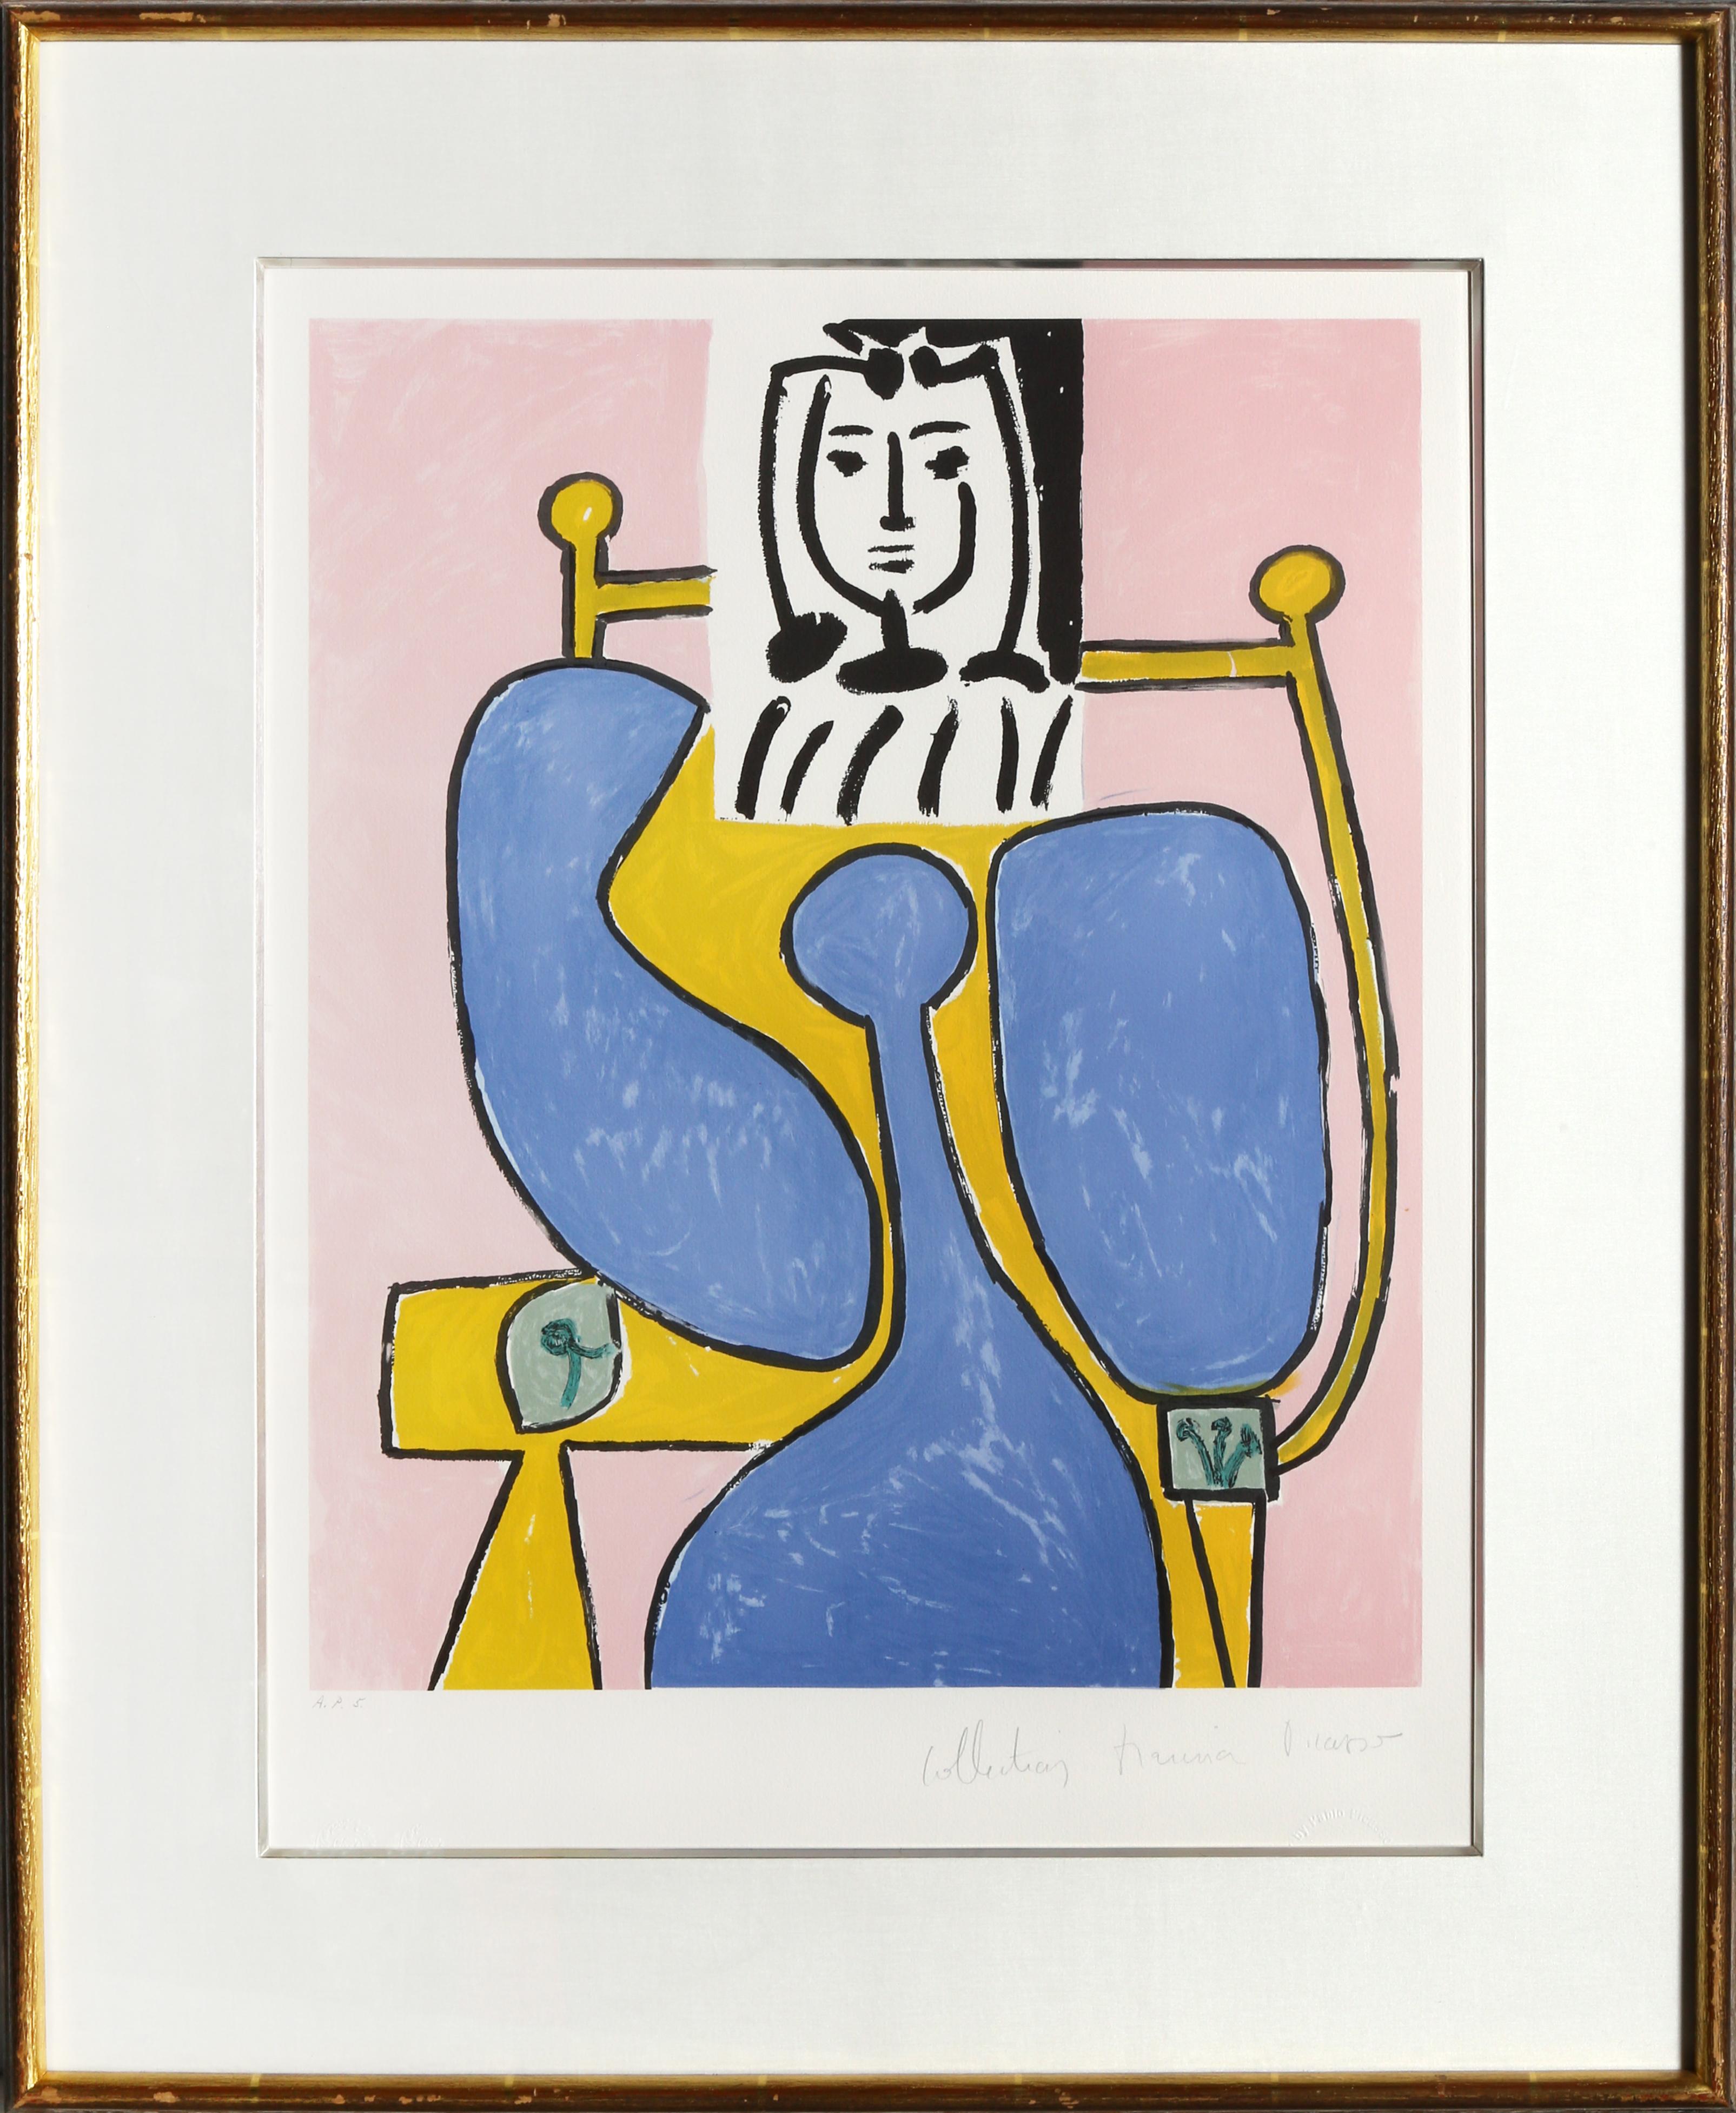 A lithograph from the Marina Picasso Estate Collection after the Pablo Picasso painting "Femme Assise a la Robe Bleue".  The original painting was completed in 1949. In the 1970's after Picasso's death, Marina Picasso, his granddaughter, authorized